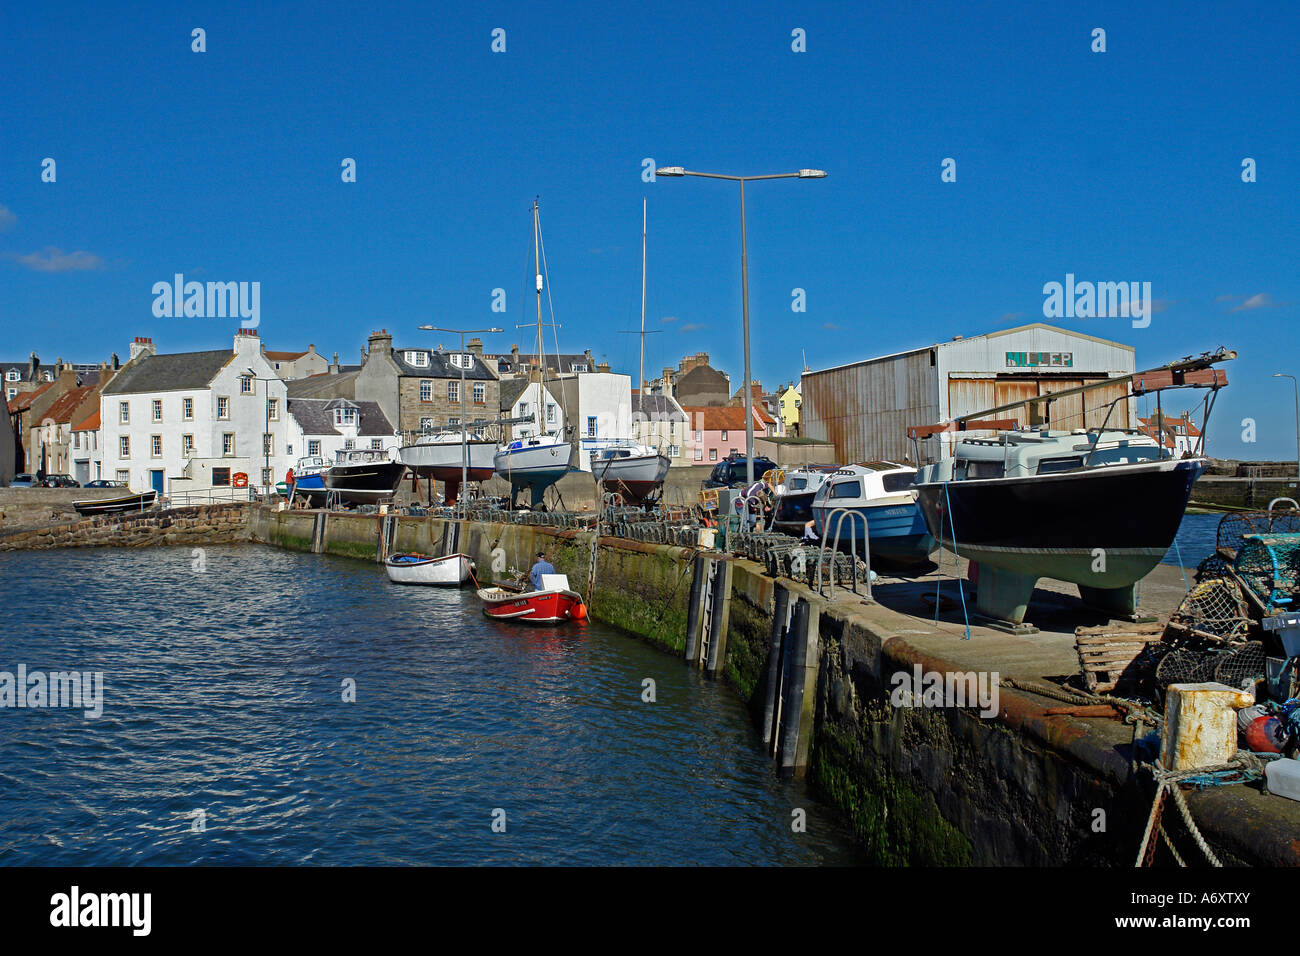 Fishing gear and boats on a pier in St. Monans harbour in Fife Scotland with traditional houses in the background. Stock Photo